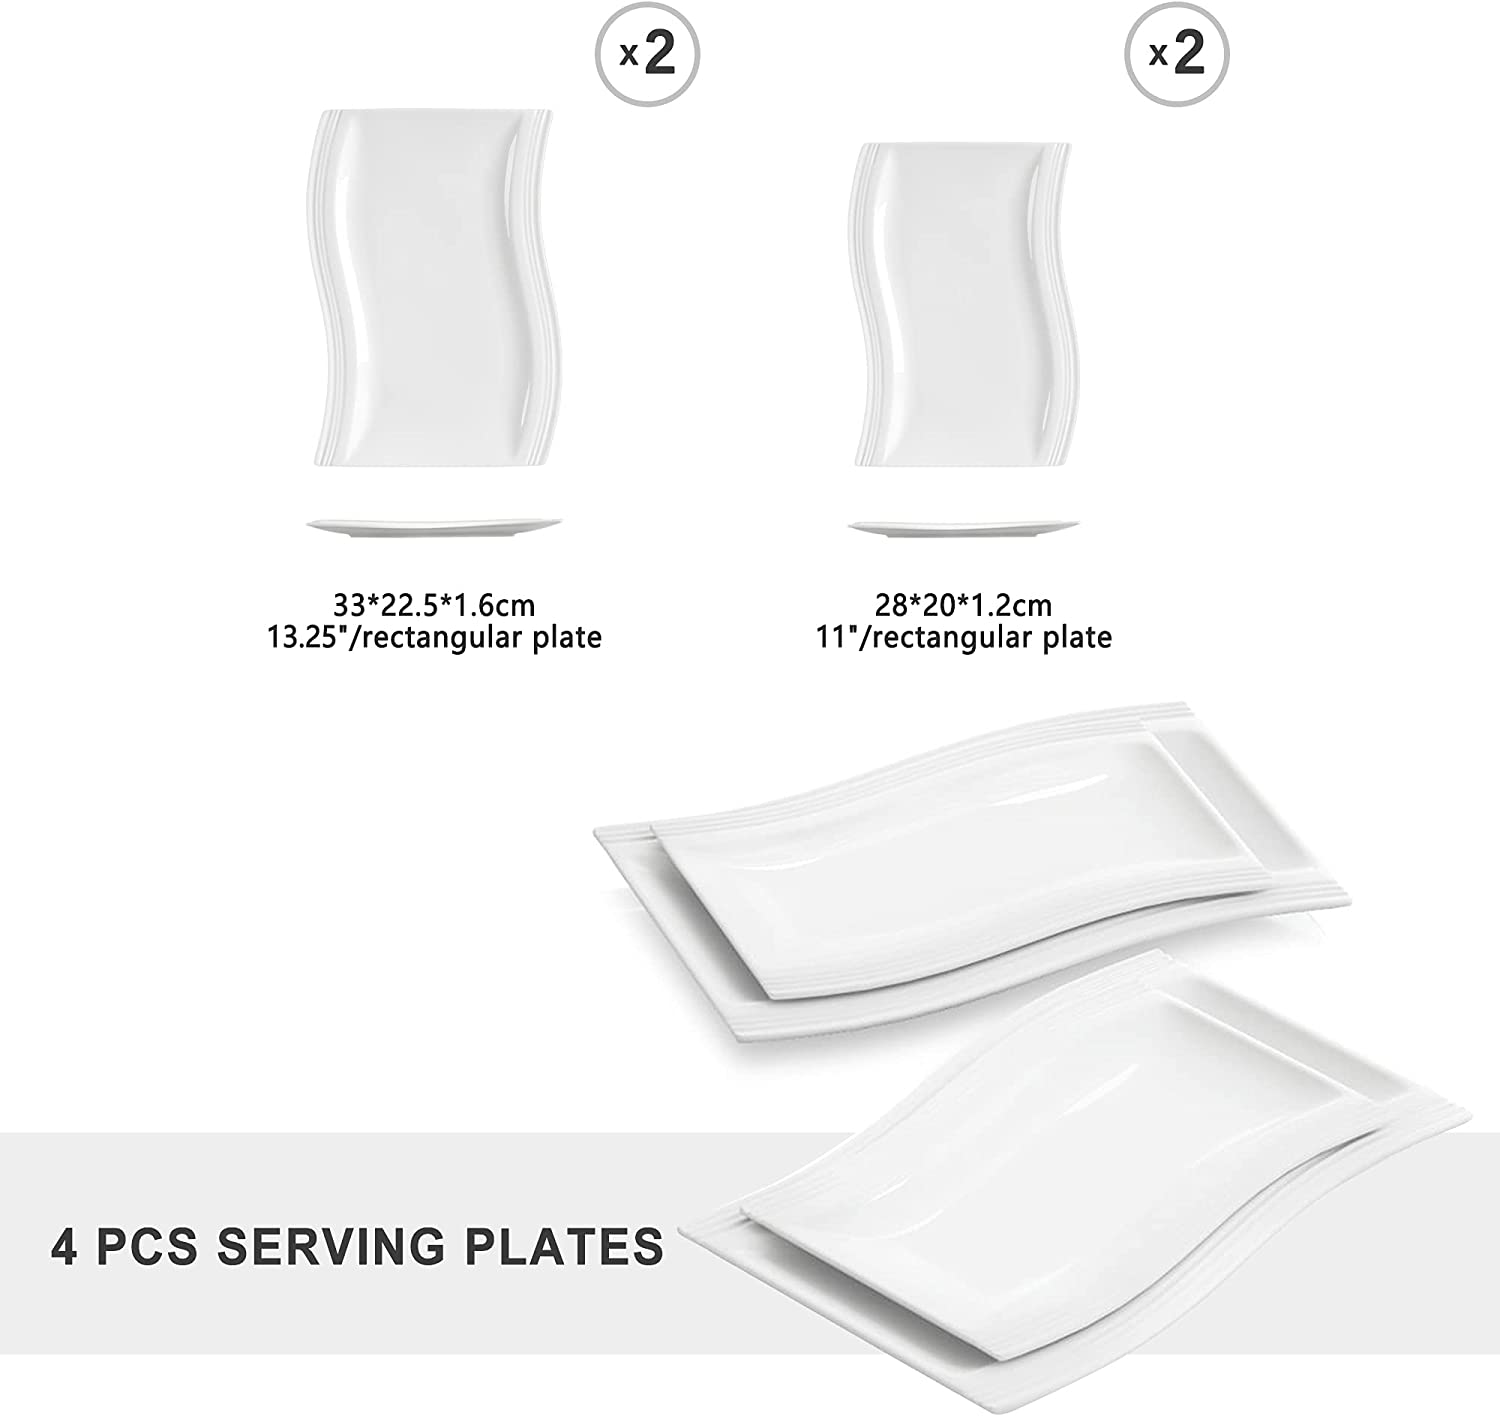 Malacasa Flora Series, Peripheral Products for 6 People, 4-piece plates.